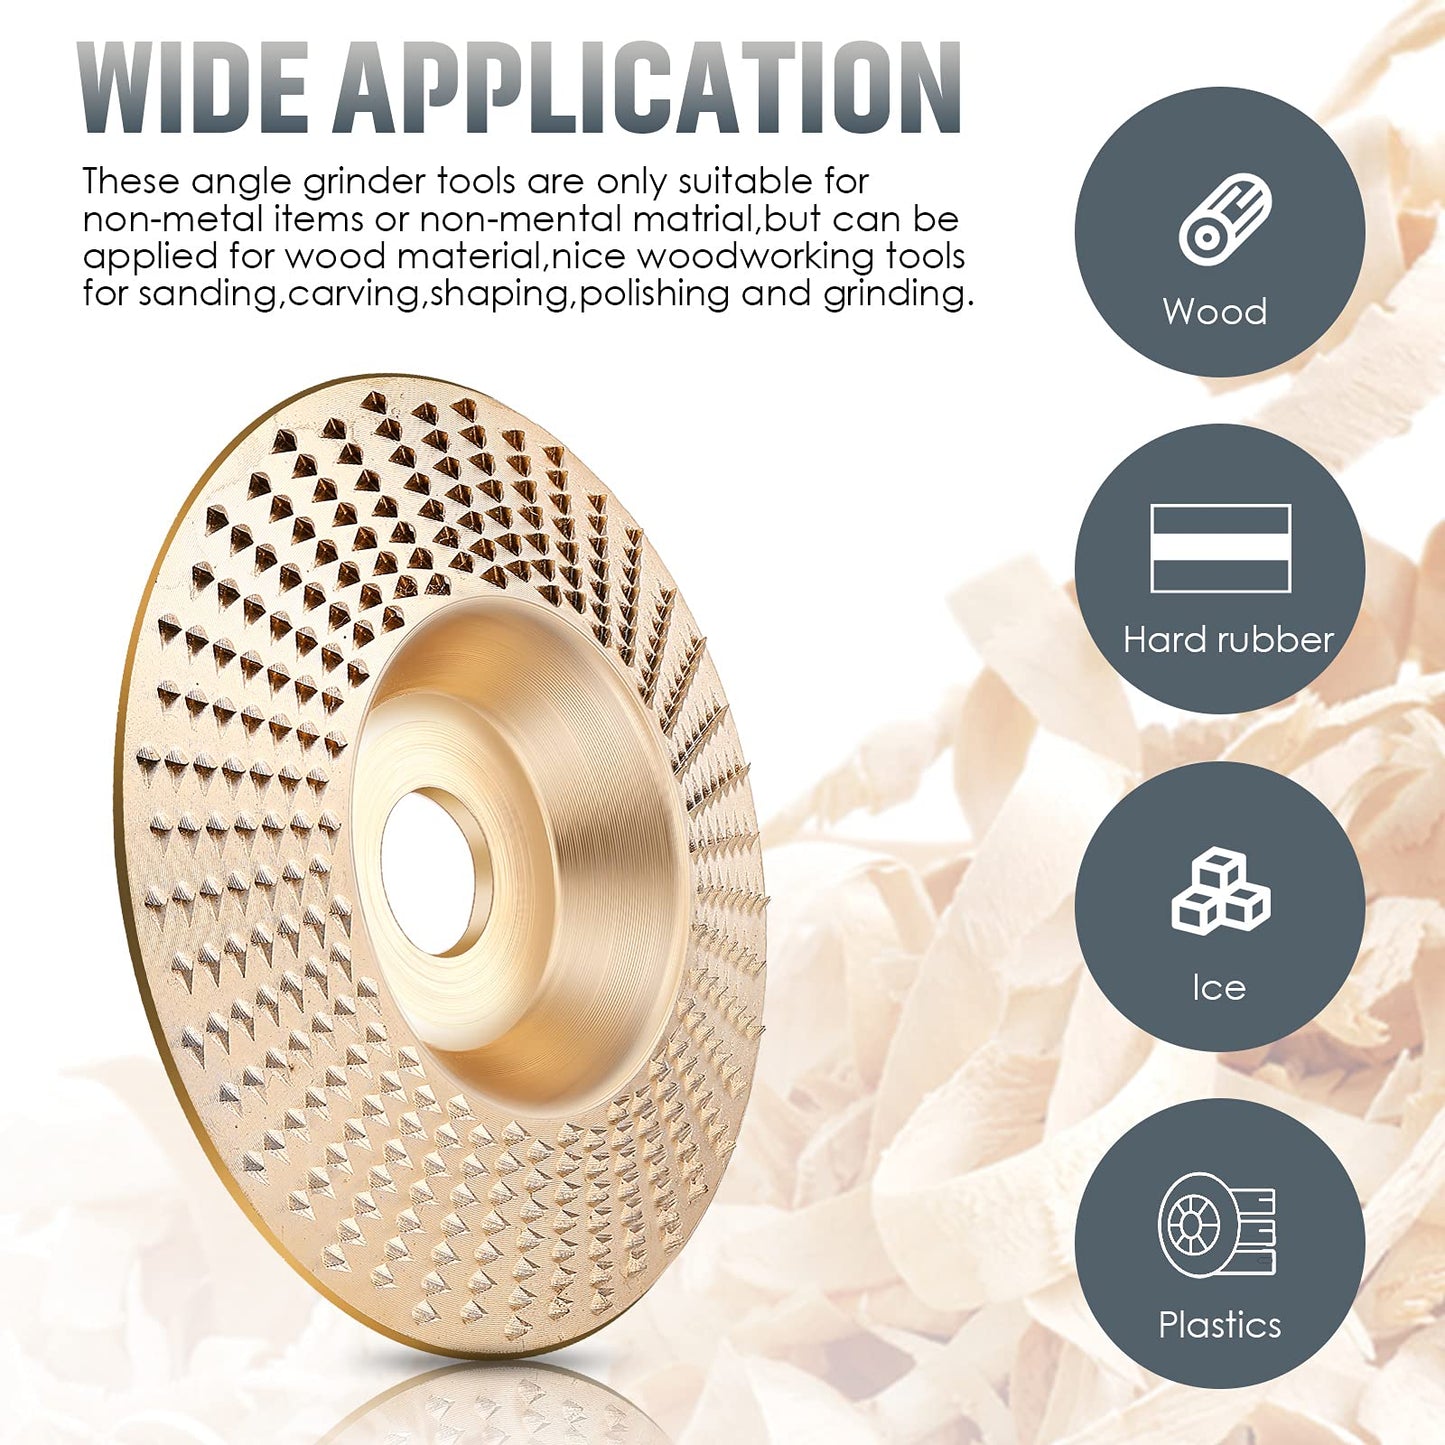 High-Quality Tungsten Carbide Grinding Wheel Disc - Durable and Efficient!